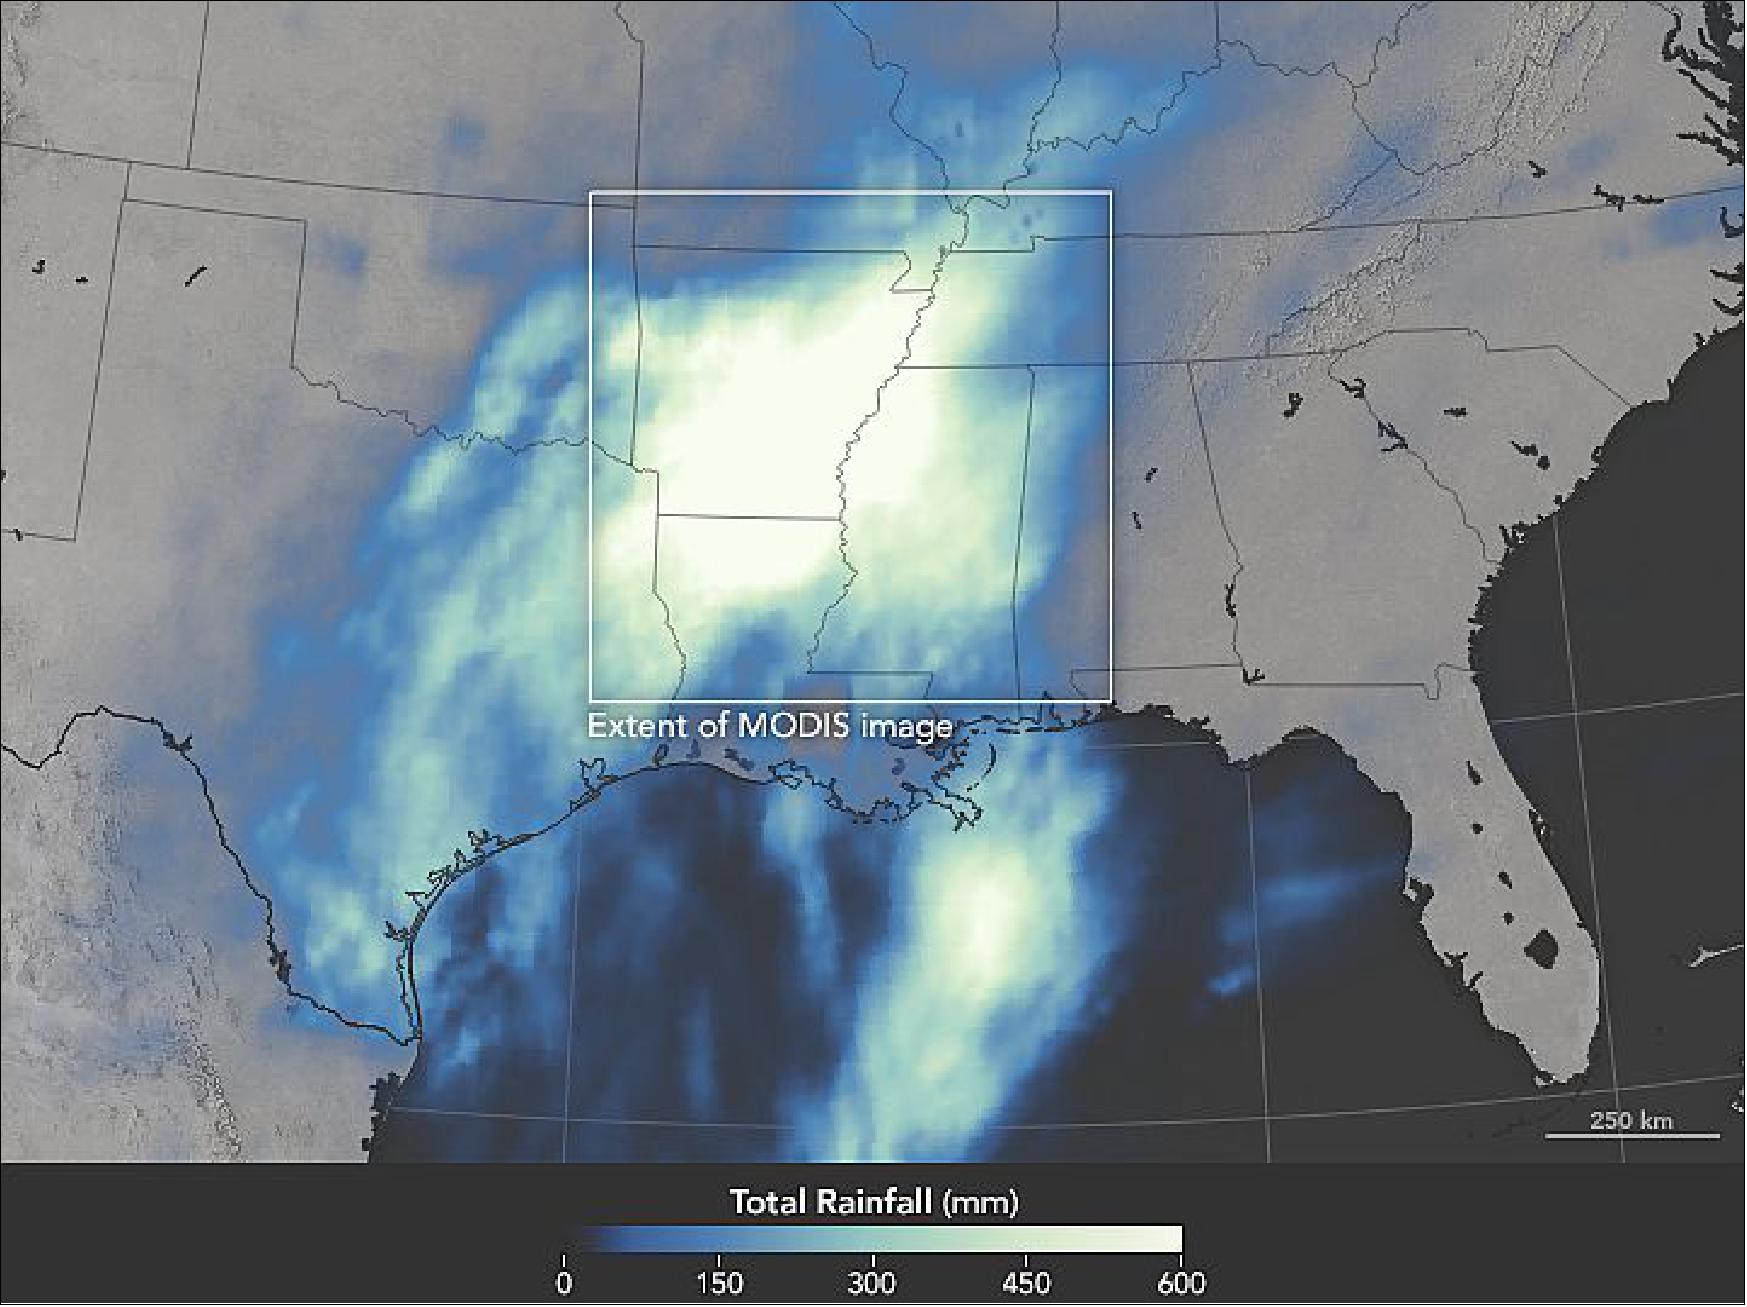 Figure 91: IMERG data image of the GPM mission showing the total rainfall and the extend of the rainfall region in the US (image credit: NASA Earth Observatory, Joshua Stevens)